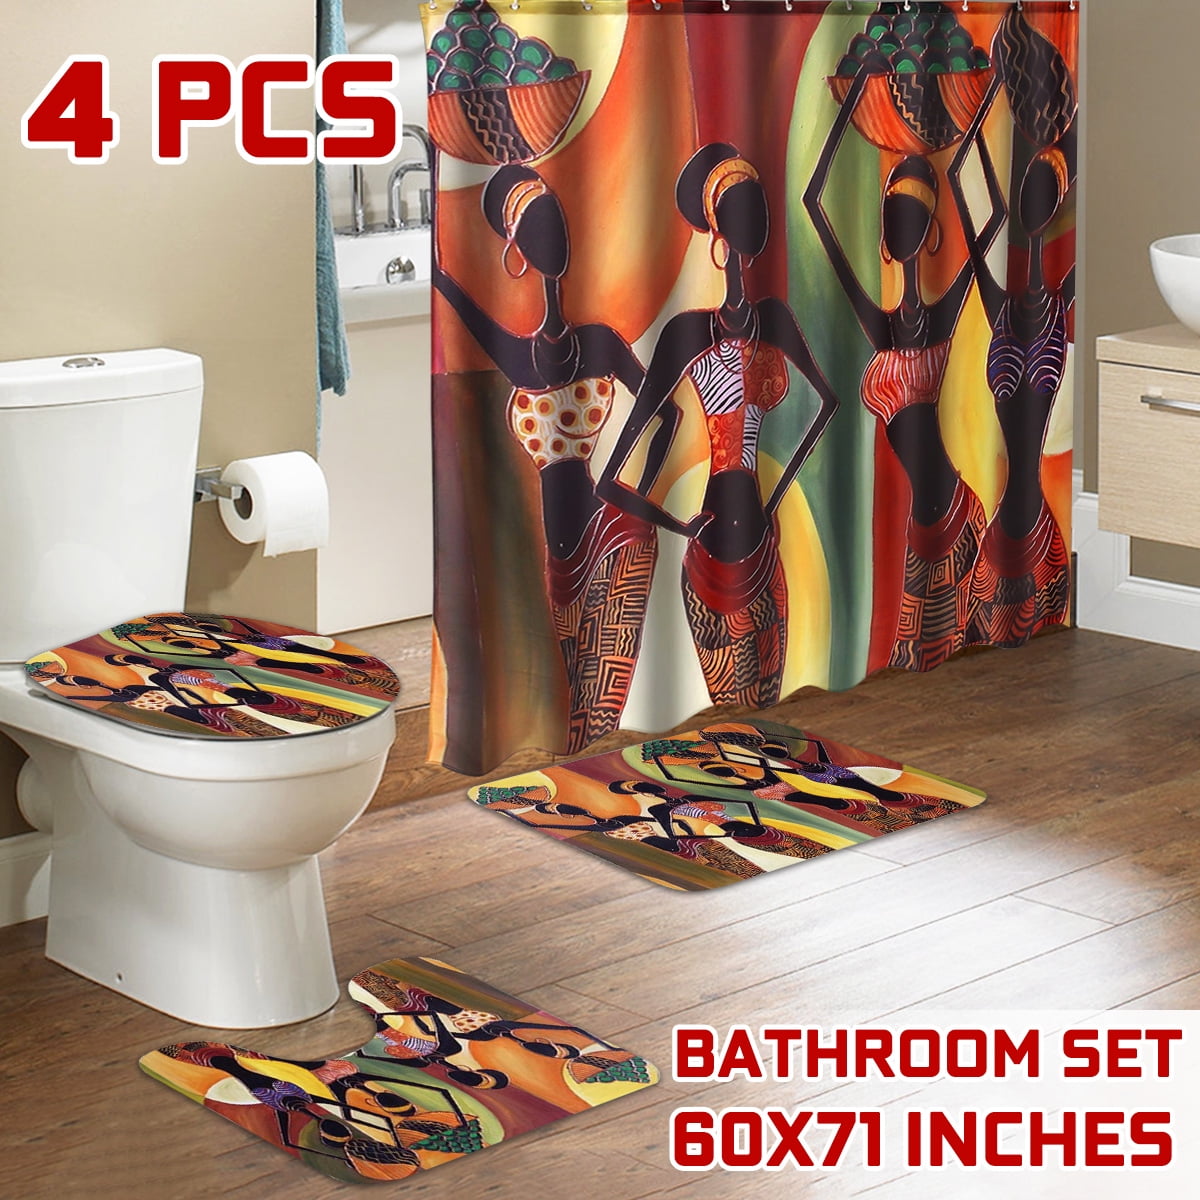 Details about   Sexy Men's Abs Waterproof Shower Curtain Sets Fabric Bathroom Mats Rug w/12 Hook 